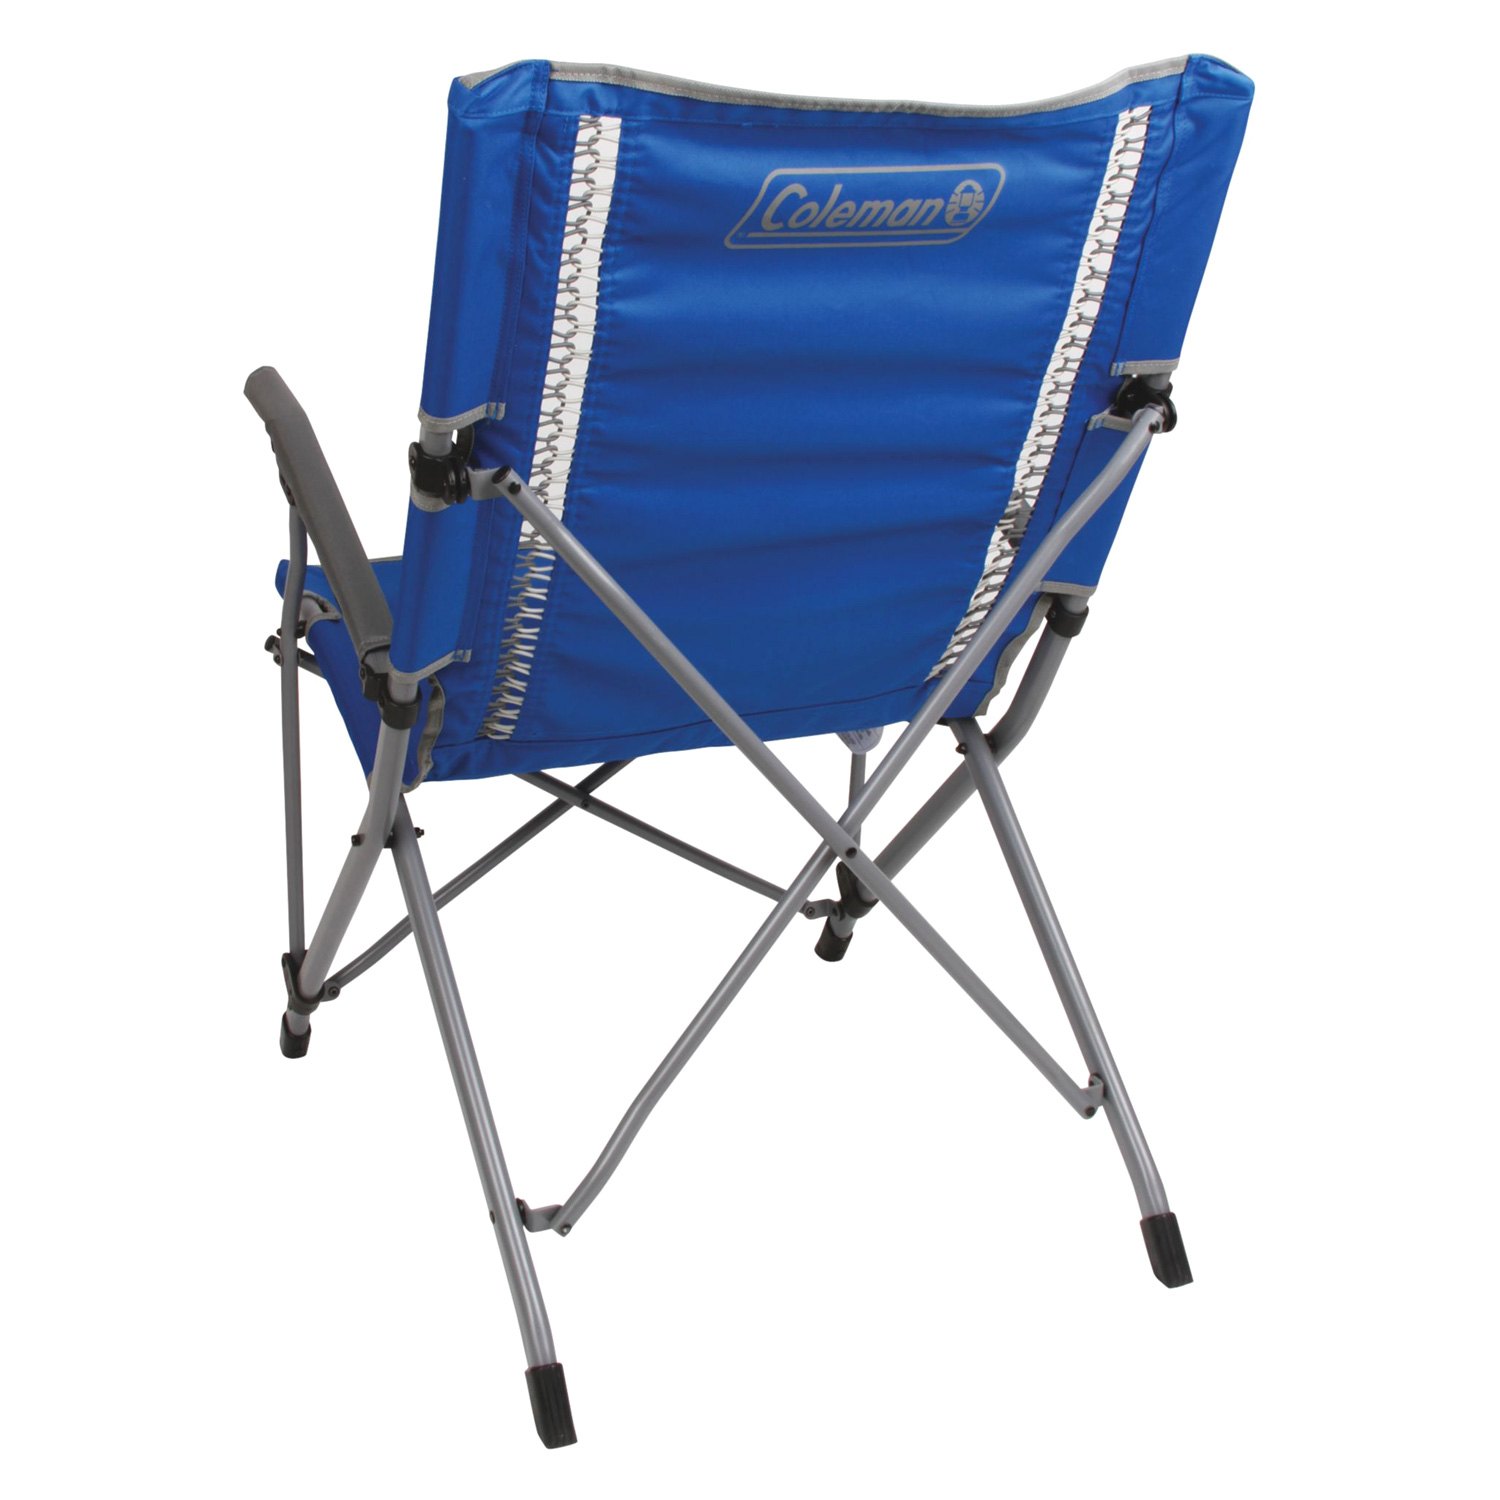 Coleman Comfortsmart Suspension Chair | The Best Chair Review Blog